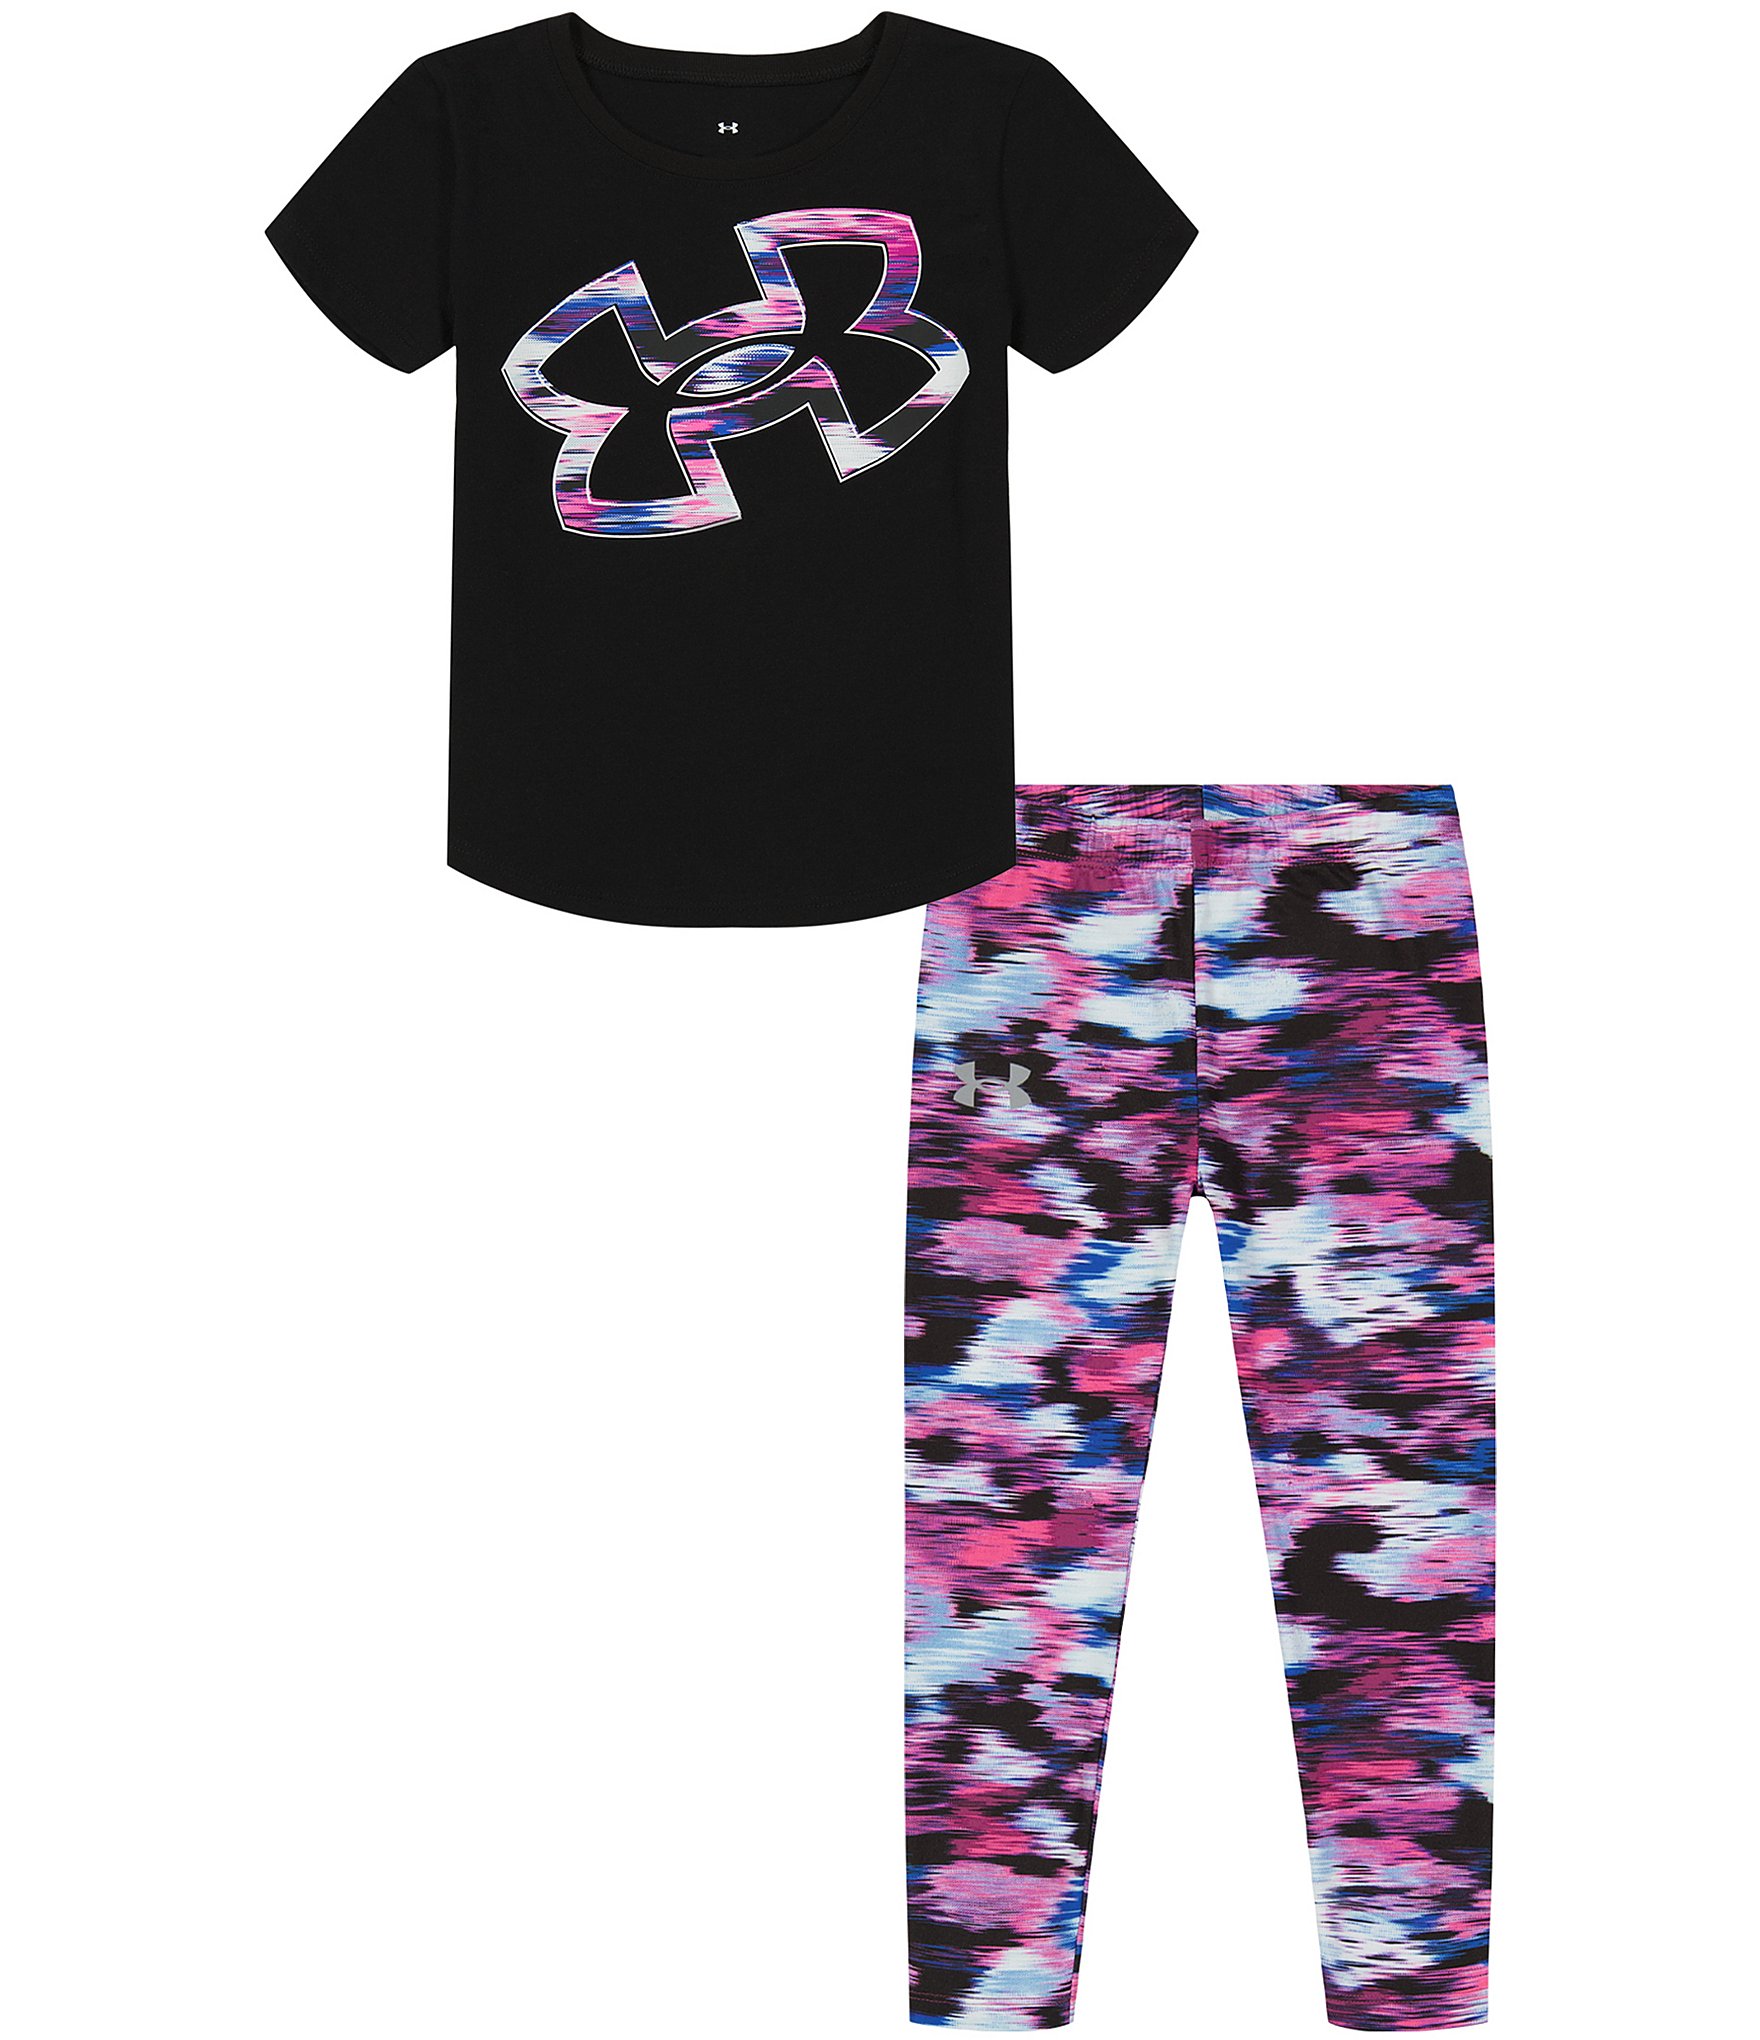 Under Armour Little Girls 2T-6X Foiled Distressed Marble Leggings